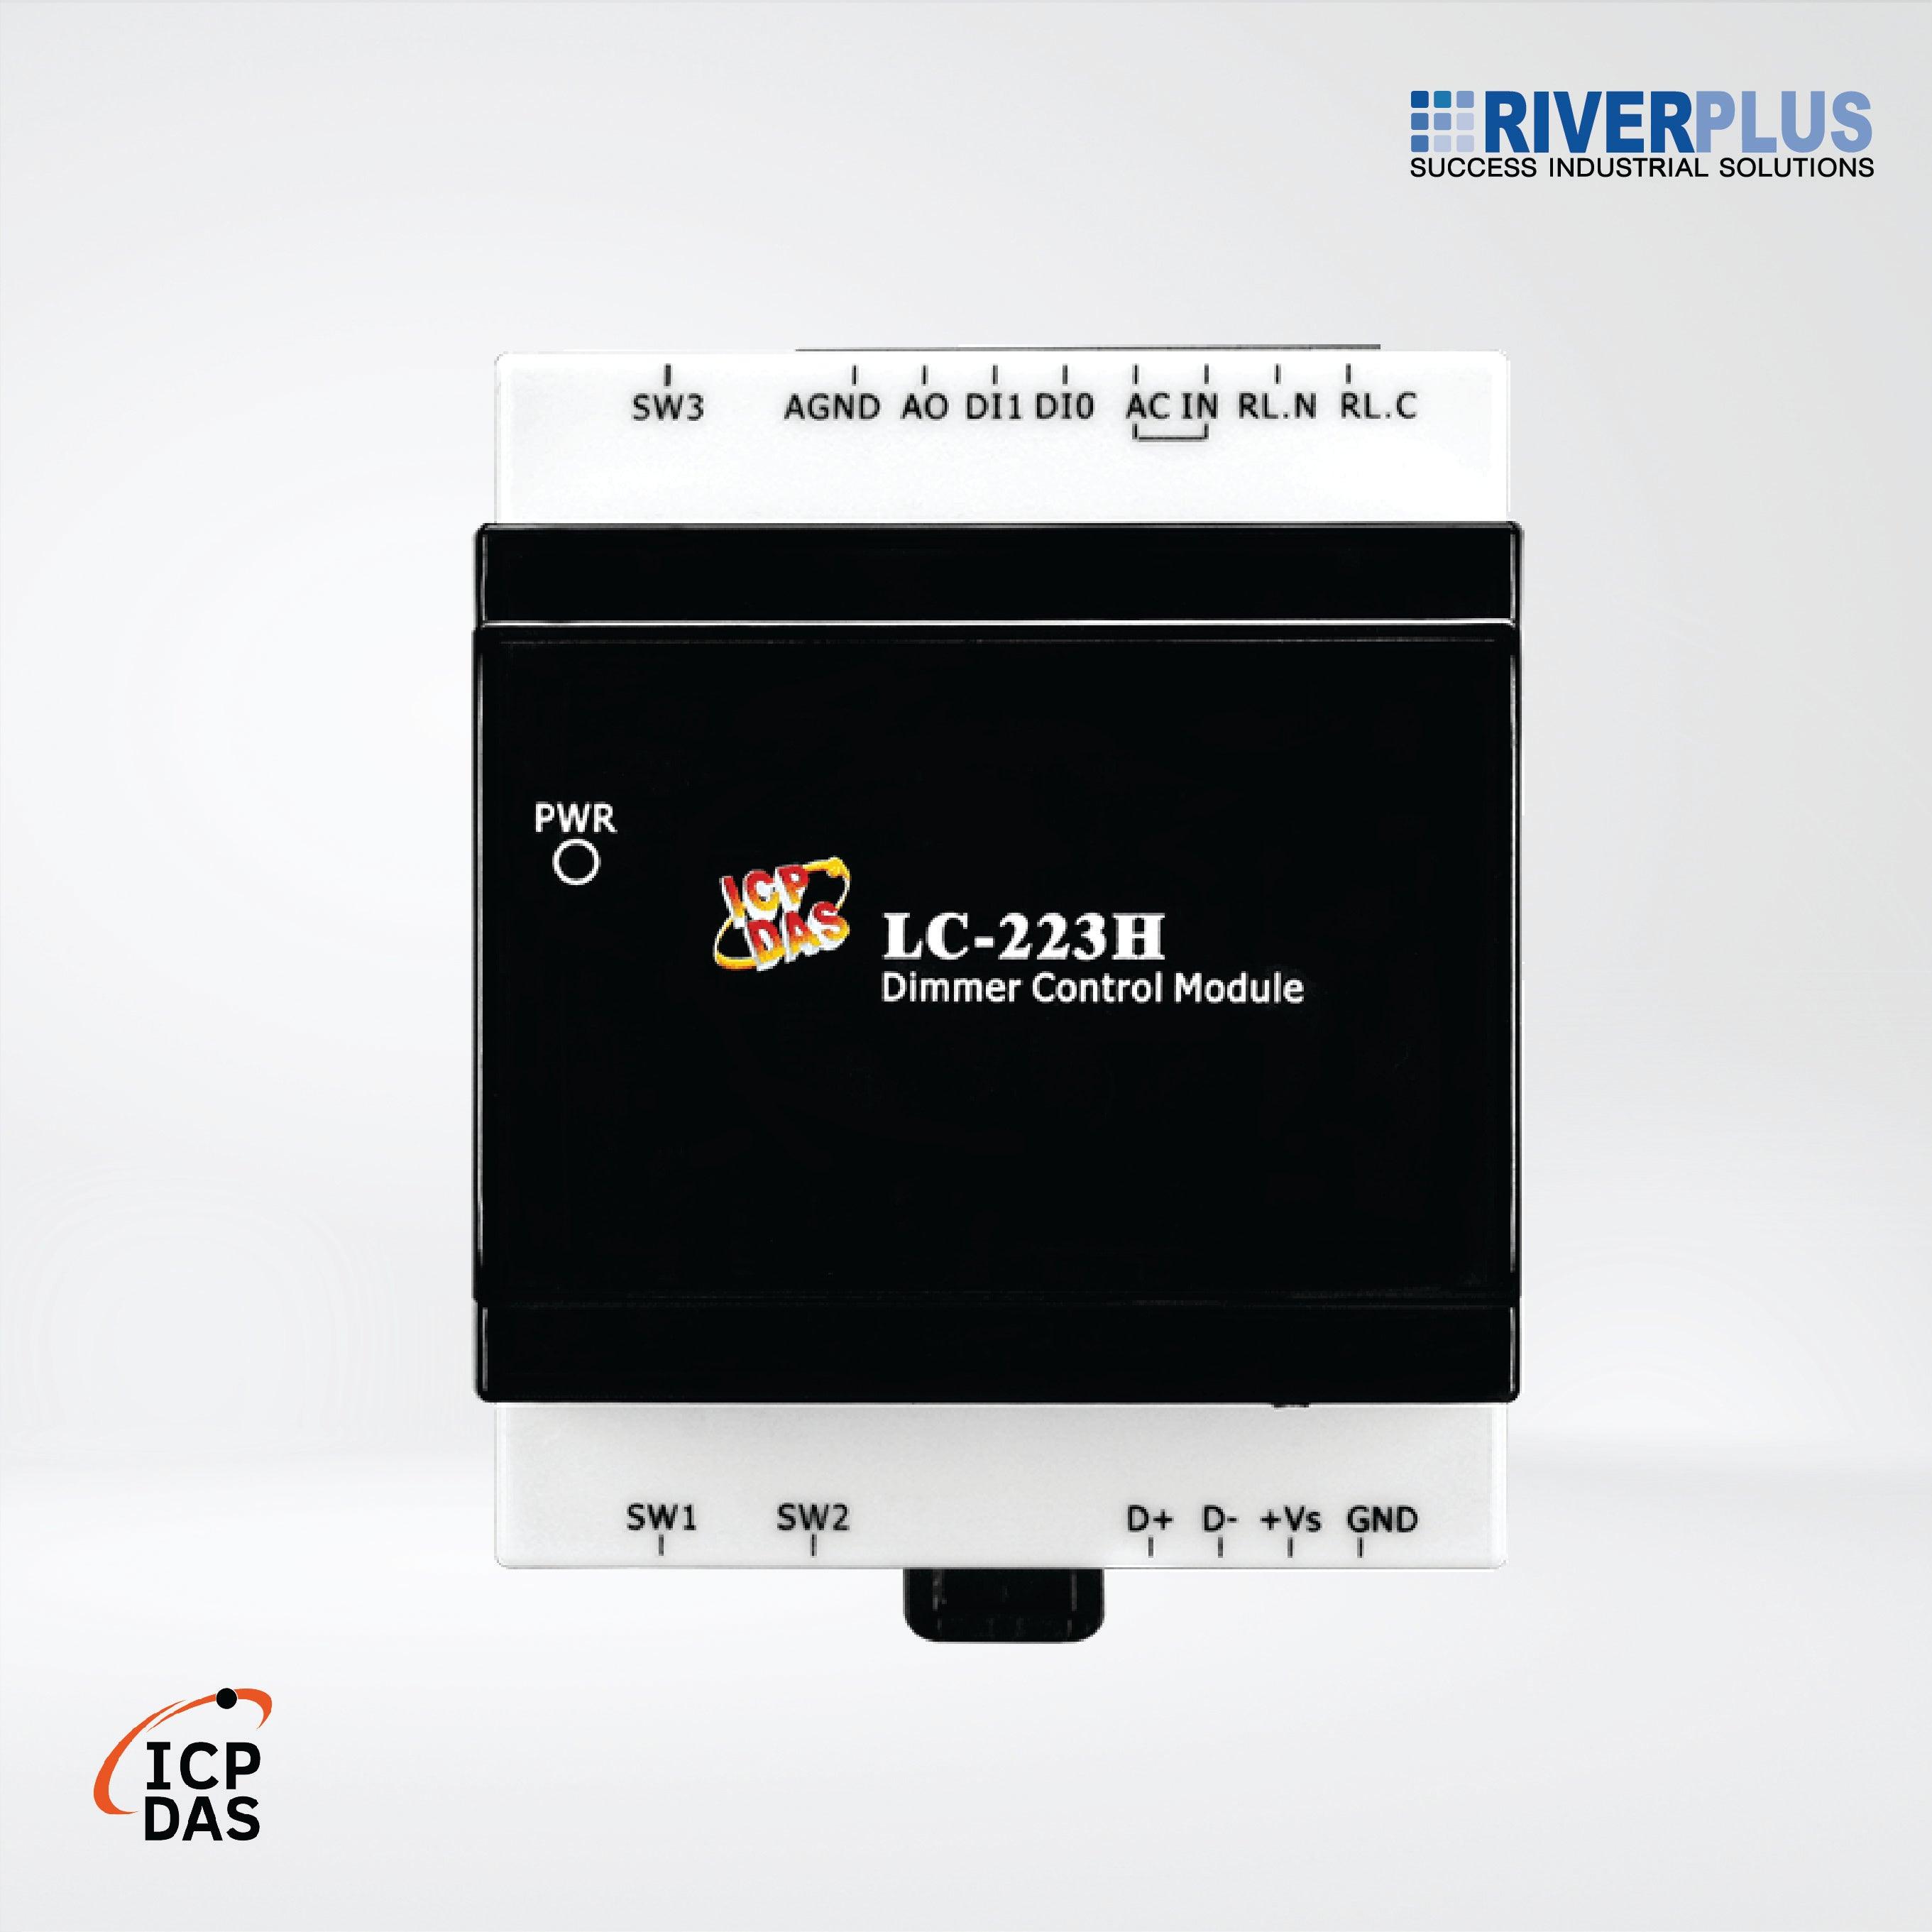 LC-223H 1-channel Dimmer Control Module - Riverplus